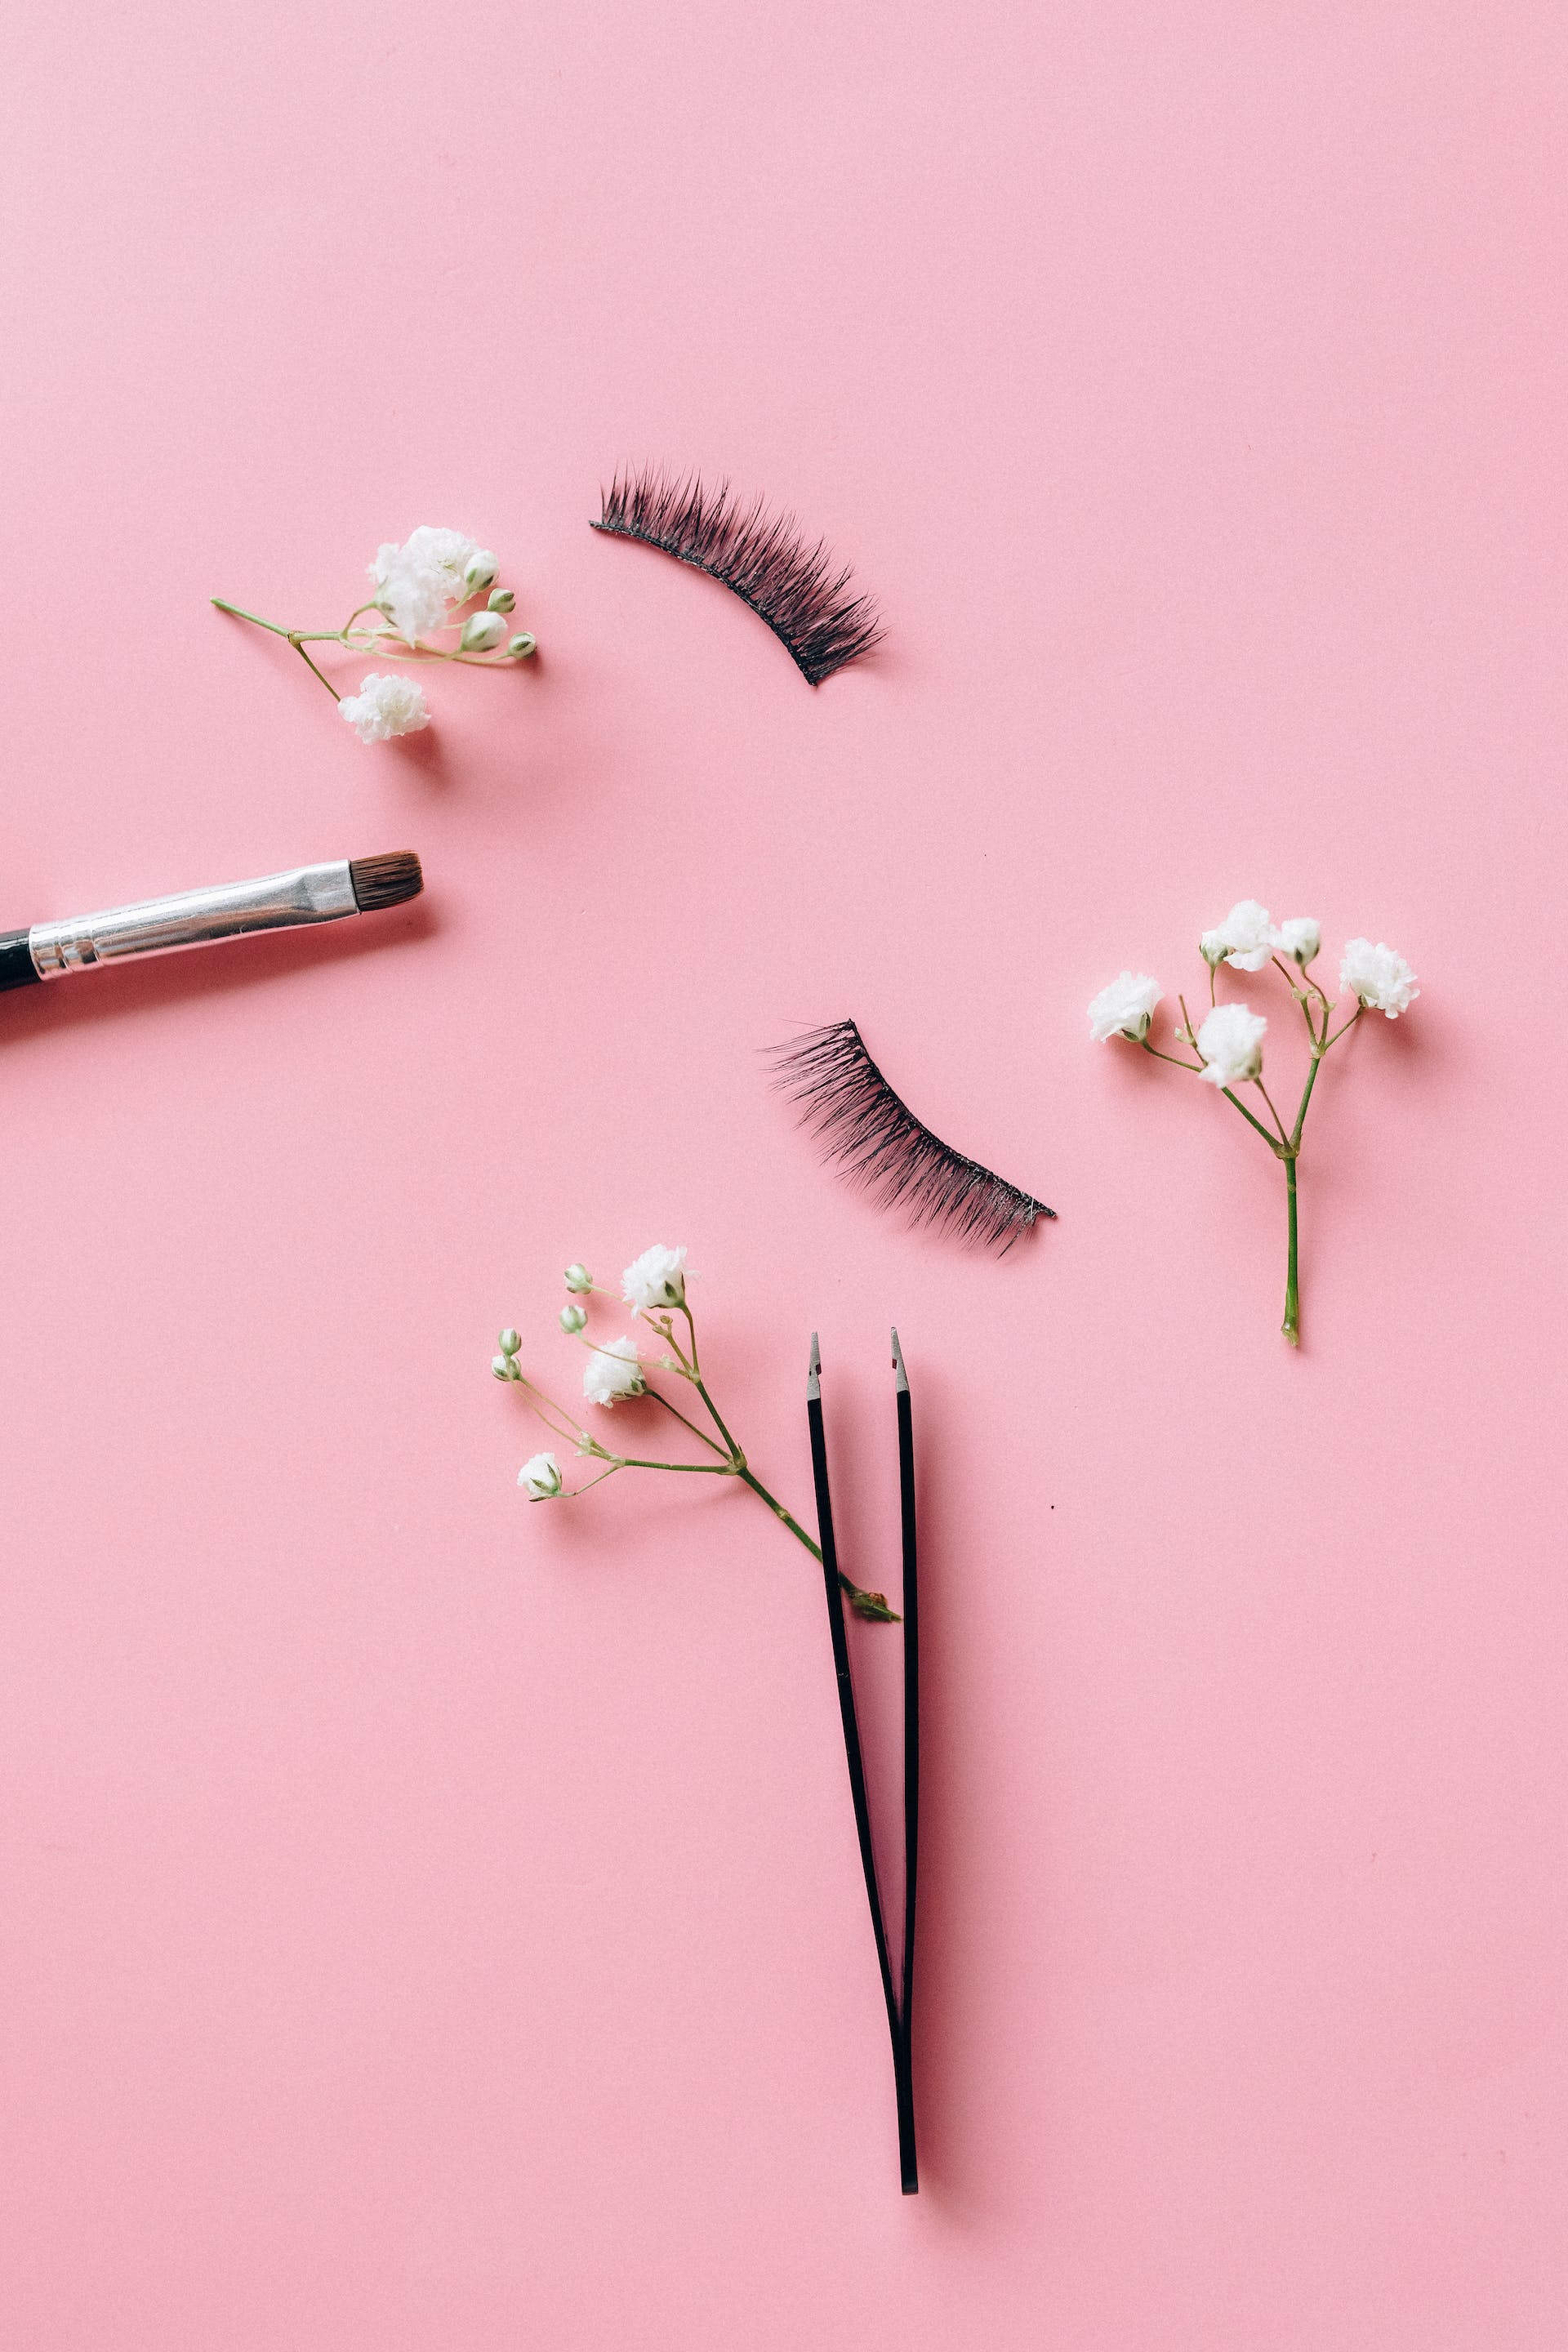 A pair of false eyelashes on a pink surface | Source: Pexels